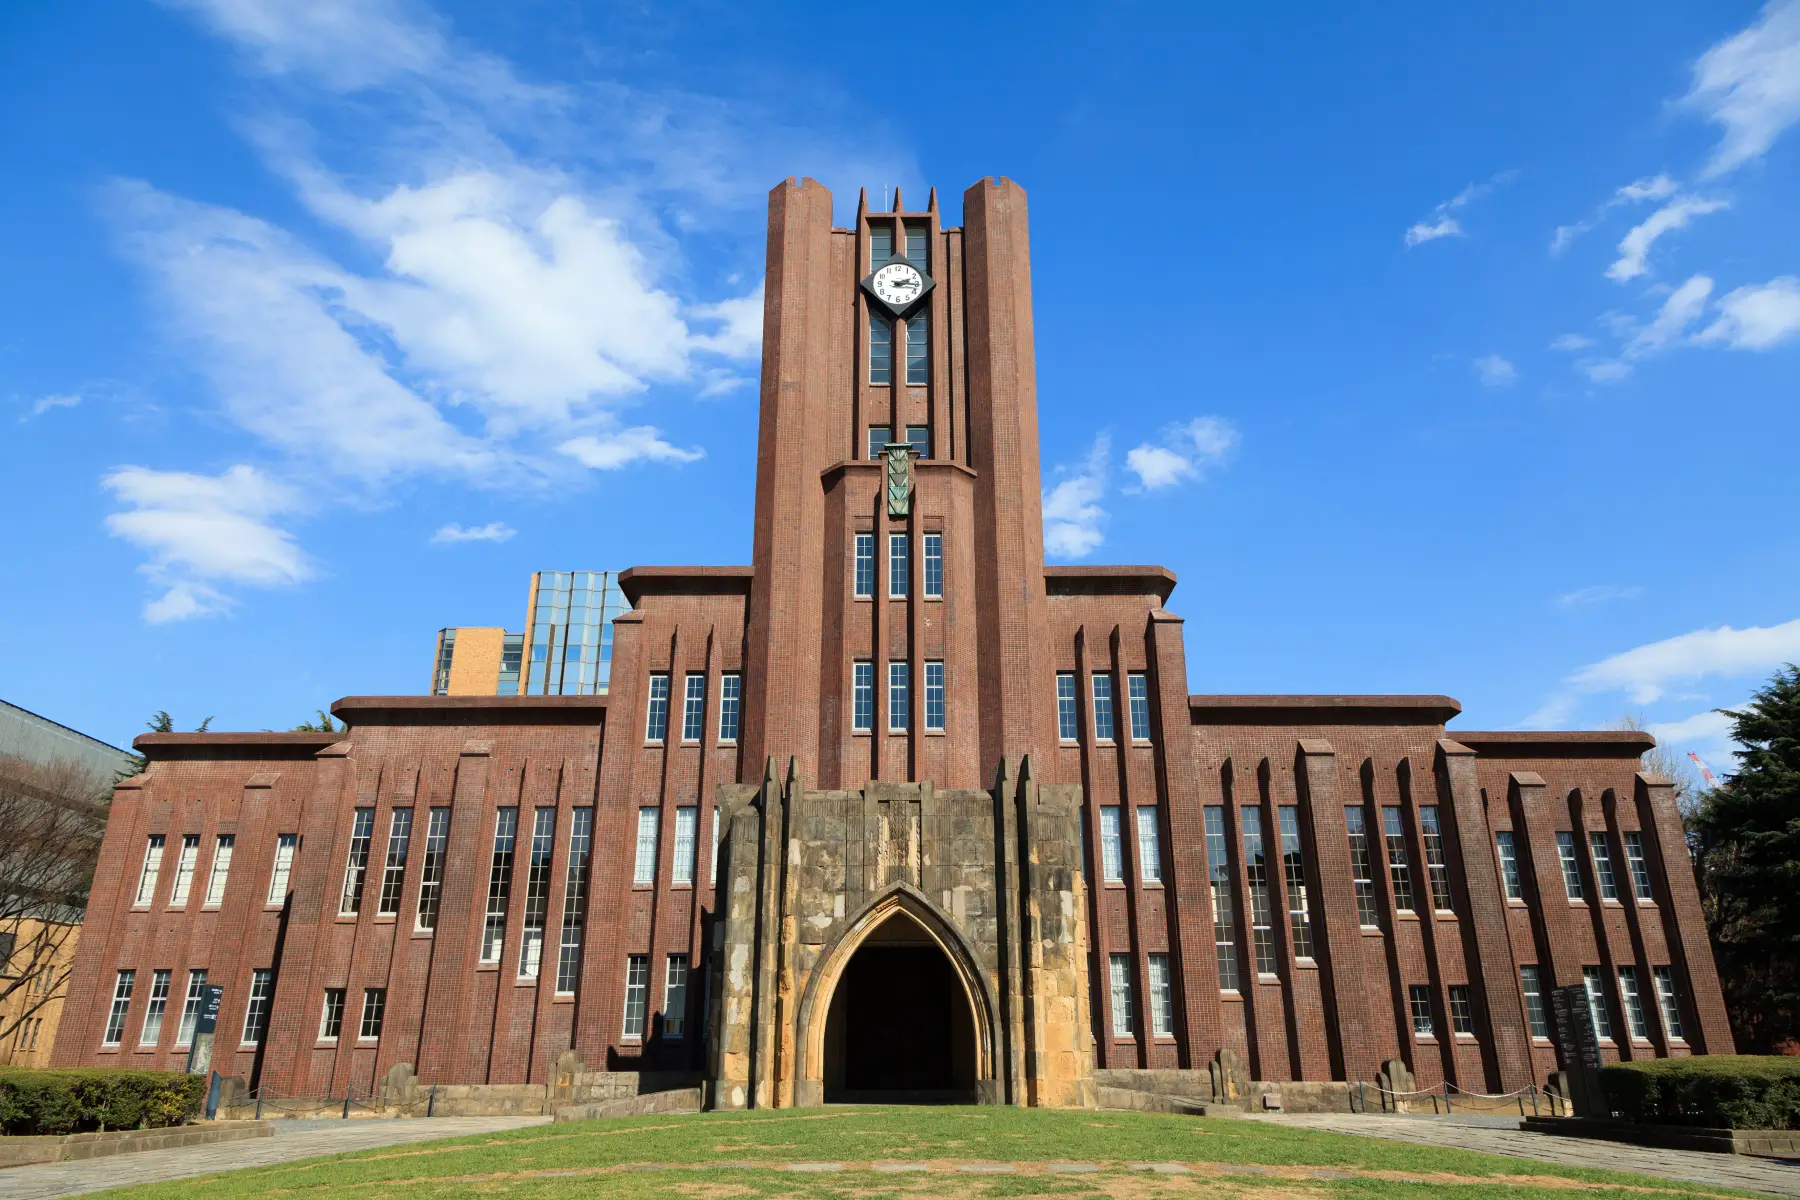 The Yasuda Auditorium at University of Tokyo on a bright day